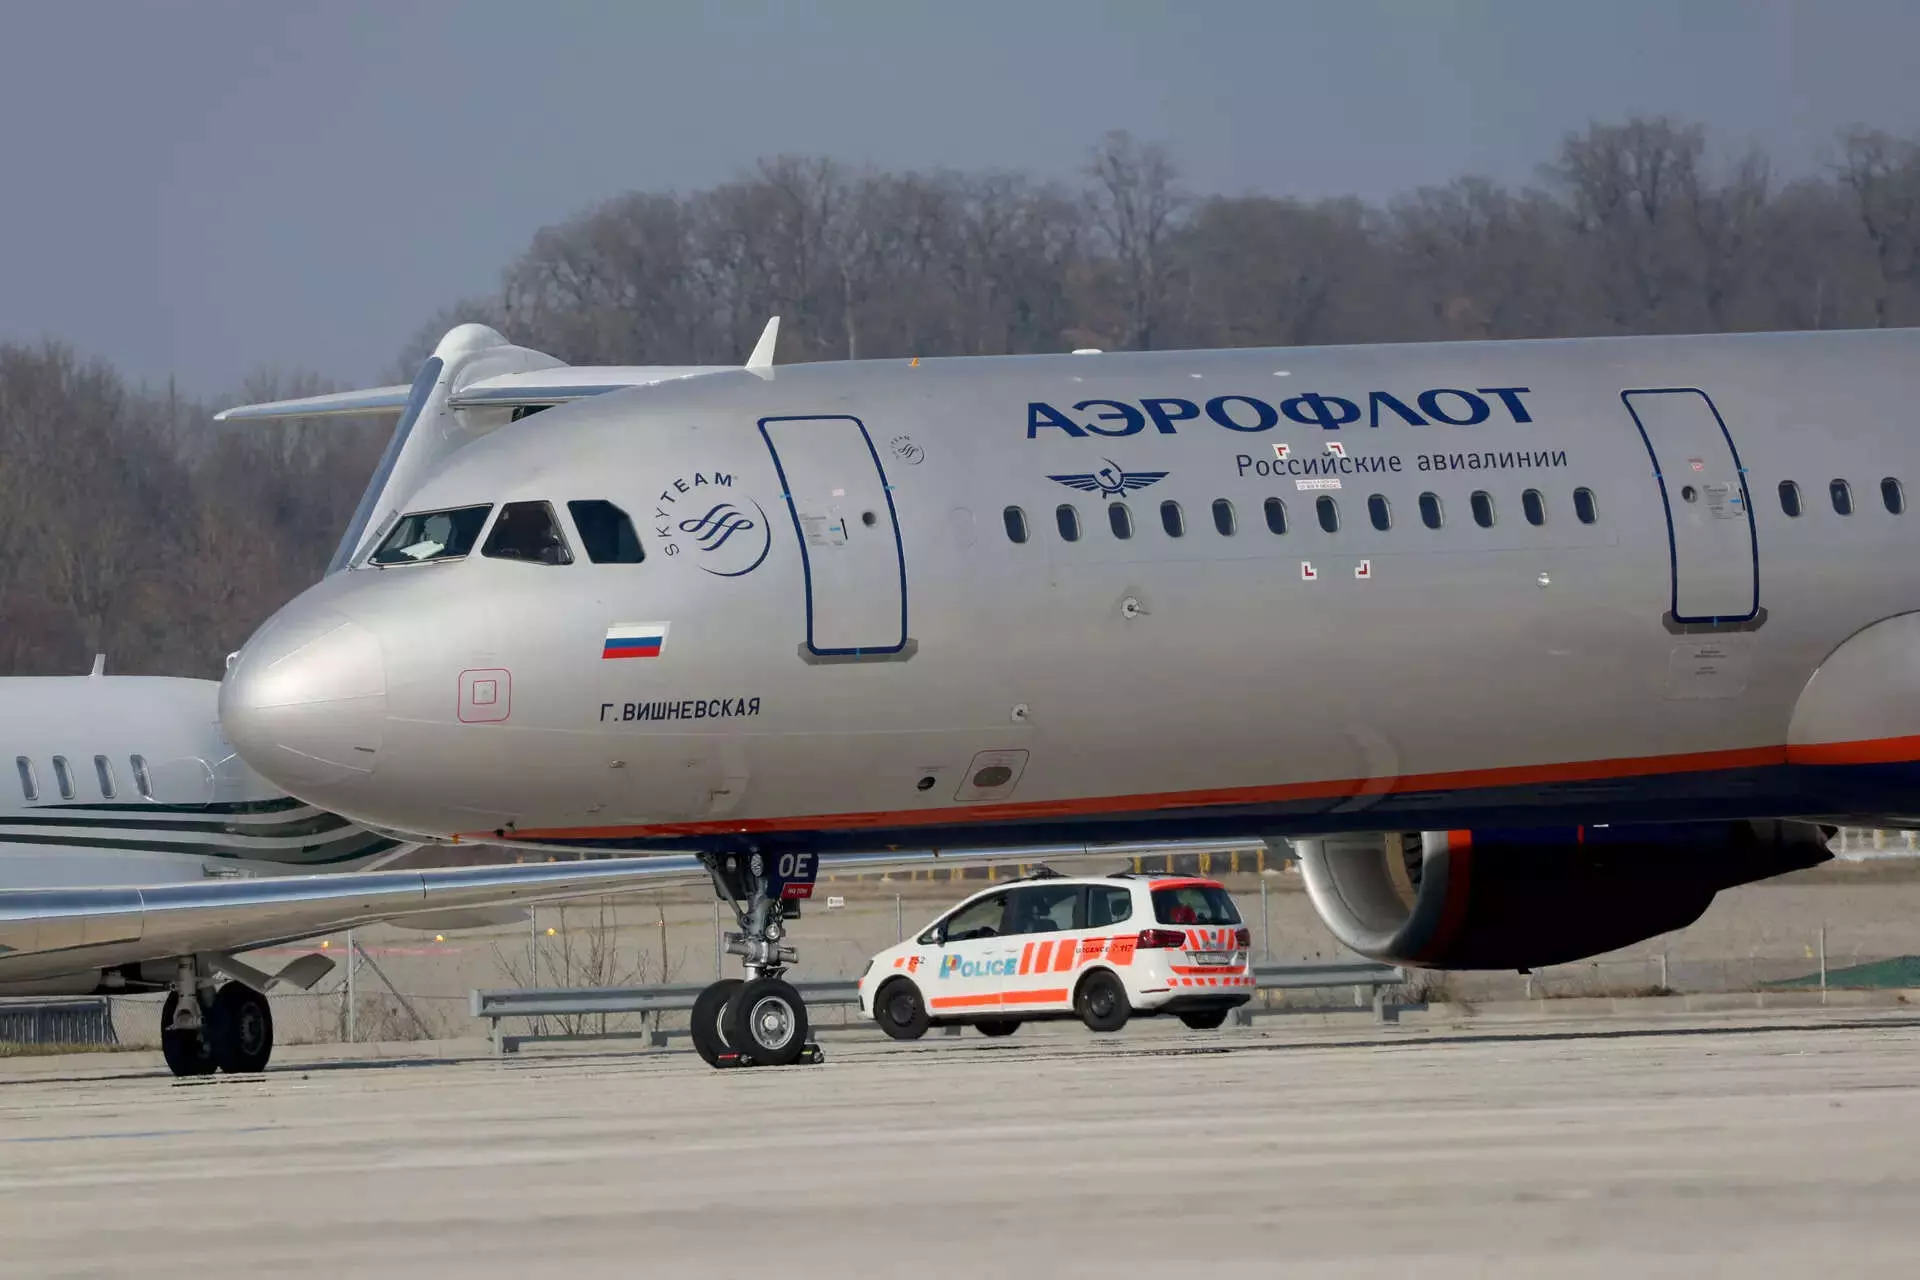 Russian Carrier Aeroflot resumes direct flights from Moscow to Goa, Delhi